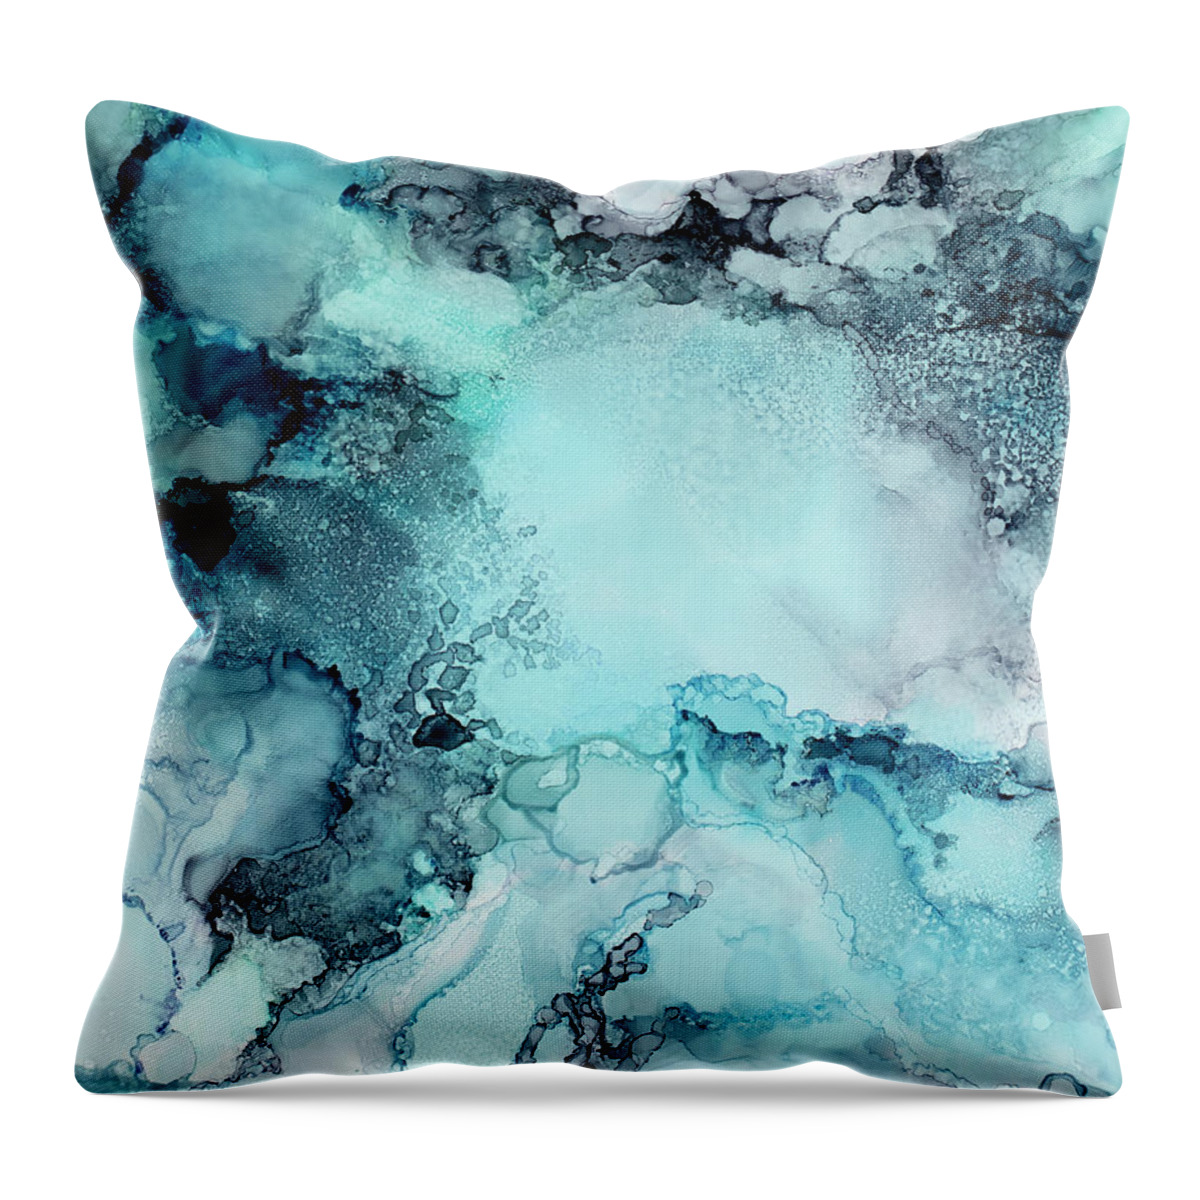 Organic Throw Pillow featuring the painting Emergence by Tamara Nelson